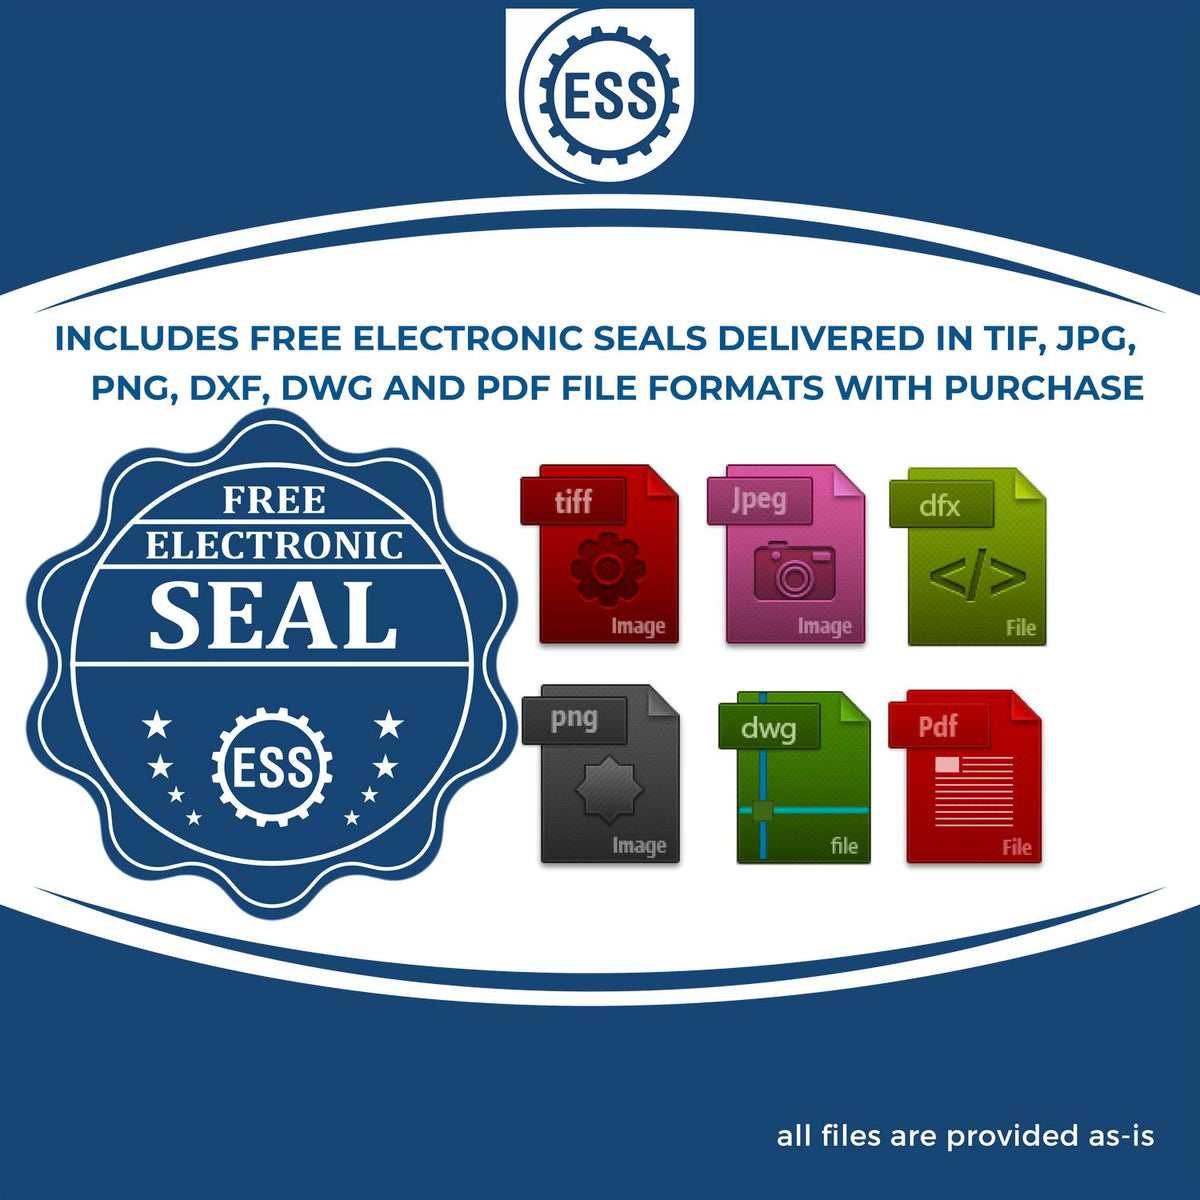 An infographic for the free electronic seal for the Slim Pre-Inked State Seal Notary Stamp for Alabama illustrating the different file type icons such as DXF, DWG, TIF, JPG and PNG.